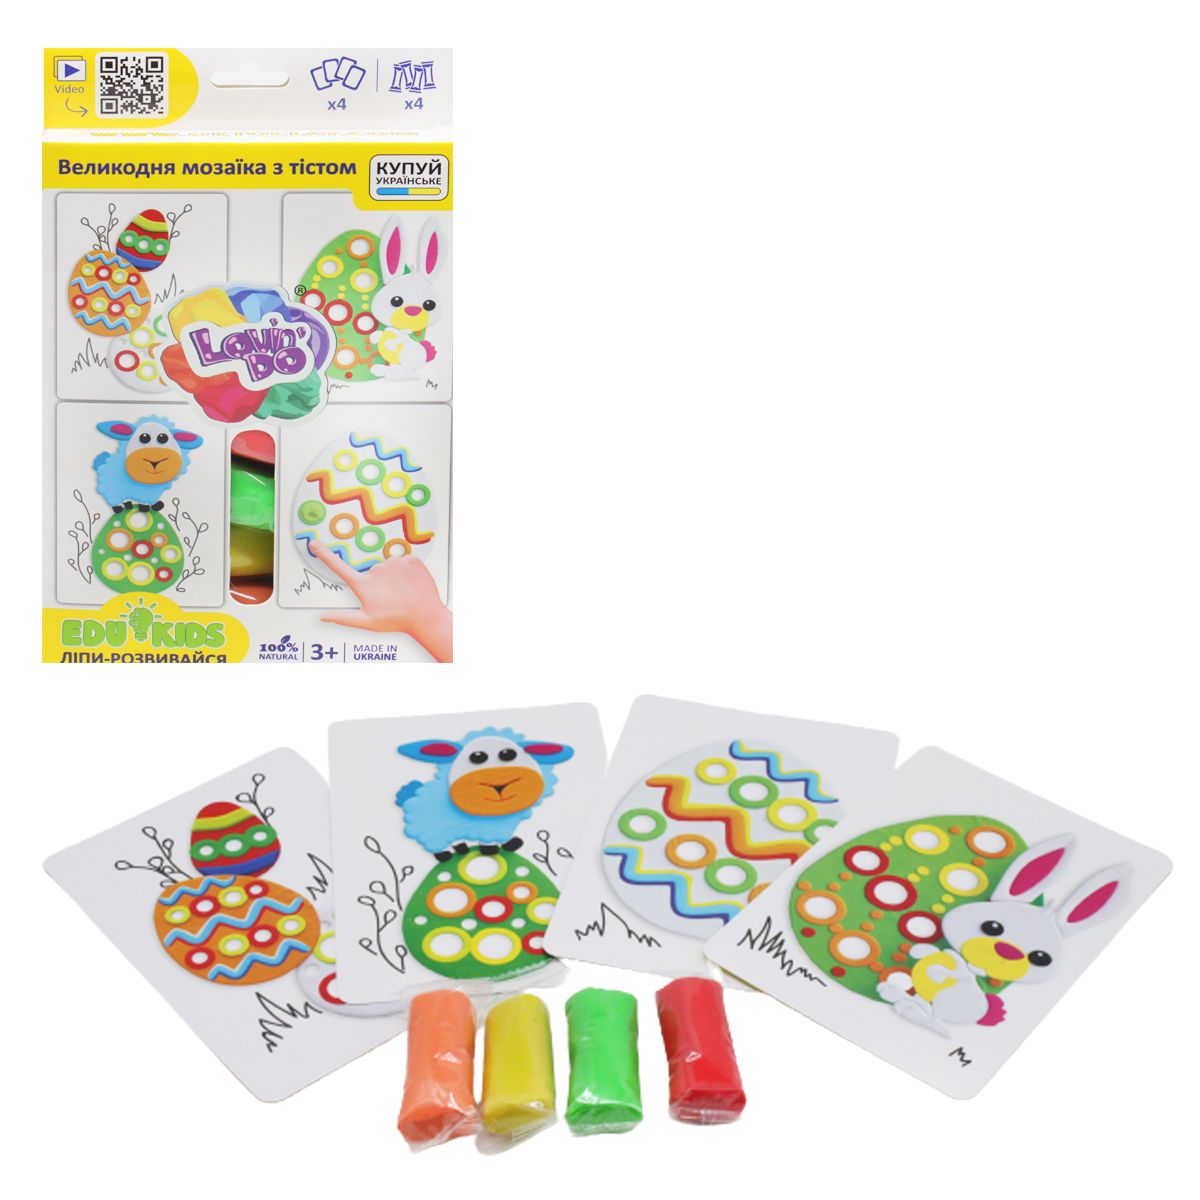 edu kids collections